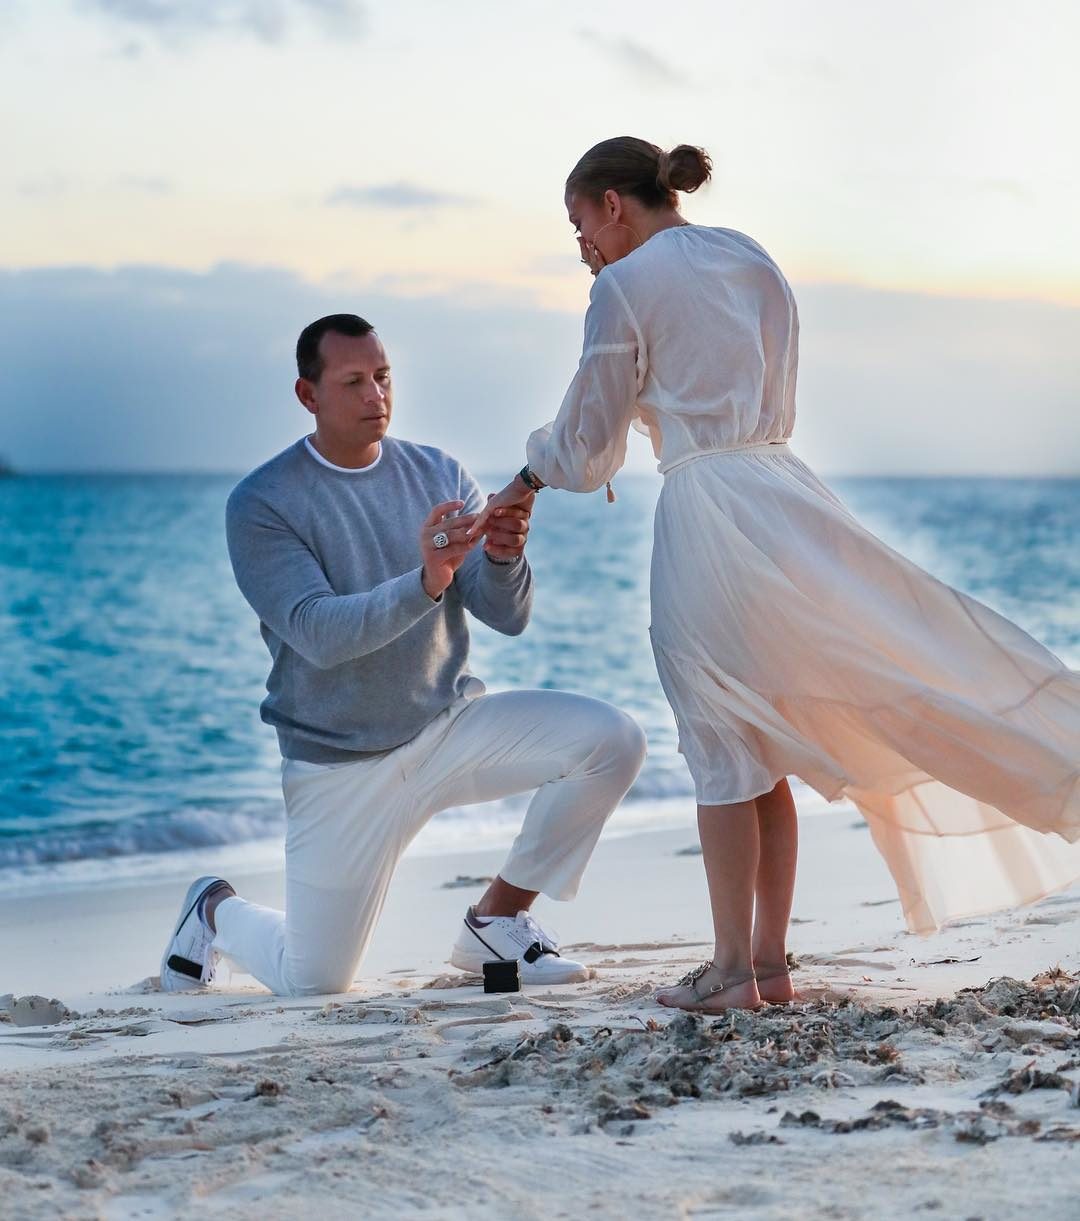 A-Rod and J. Lo Engagement